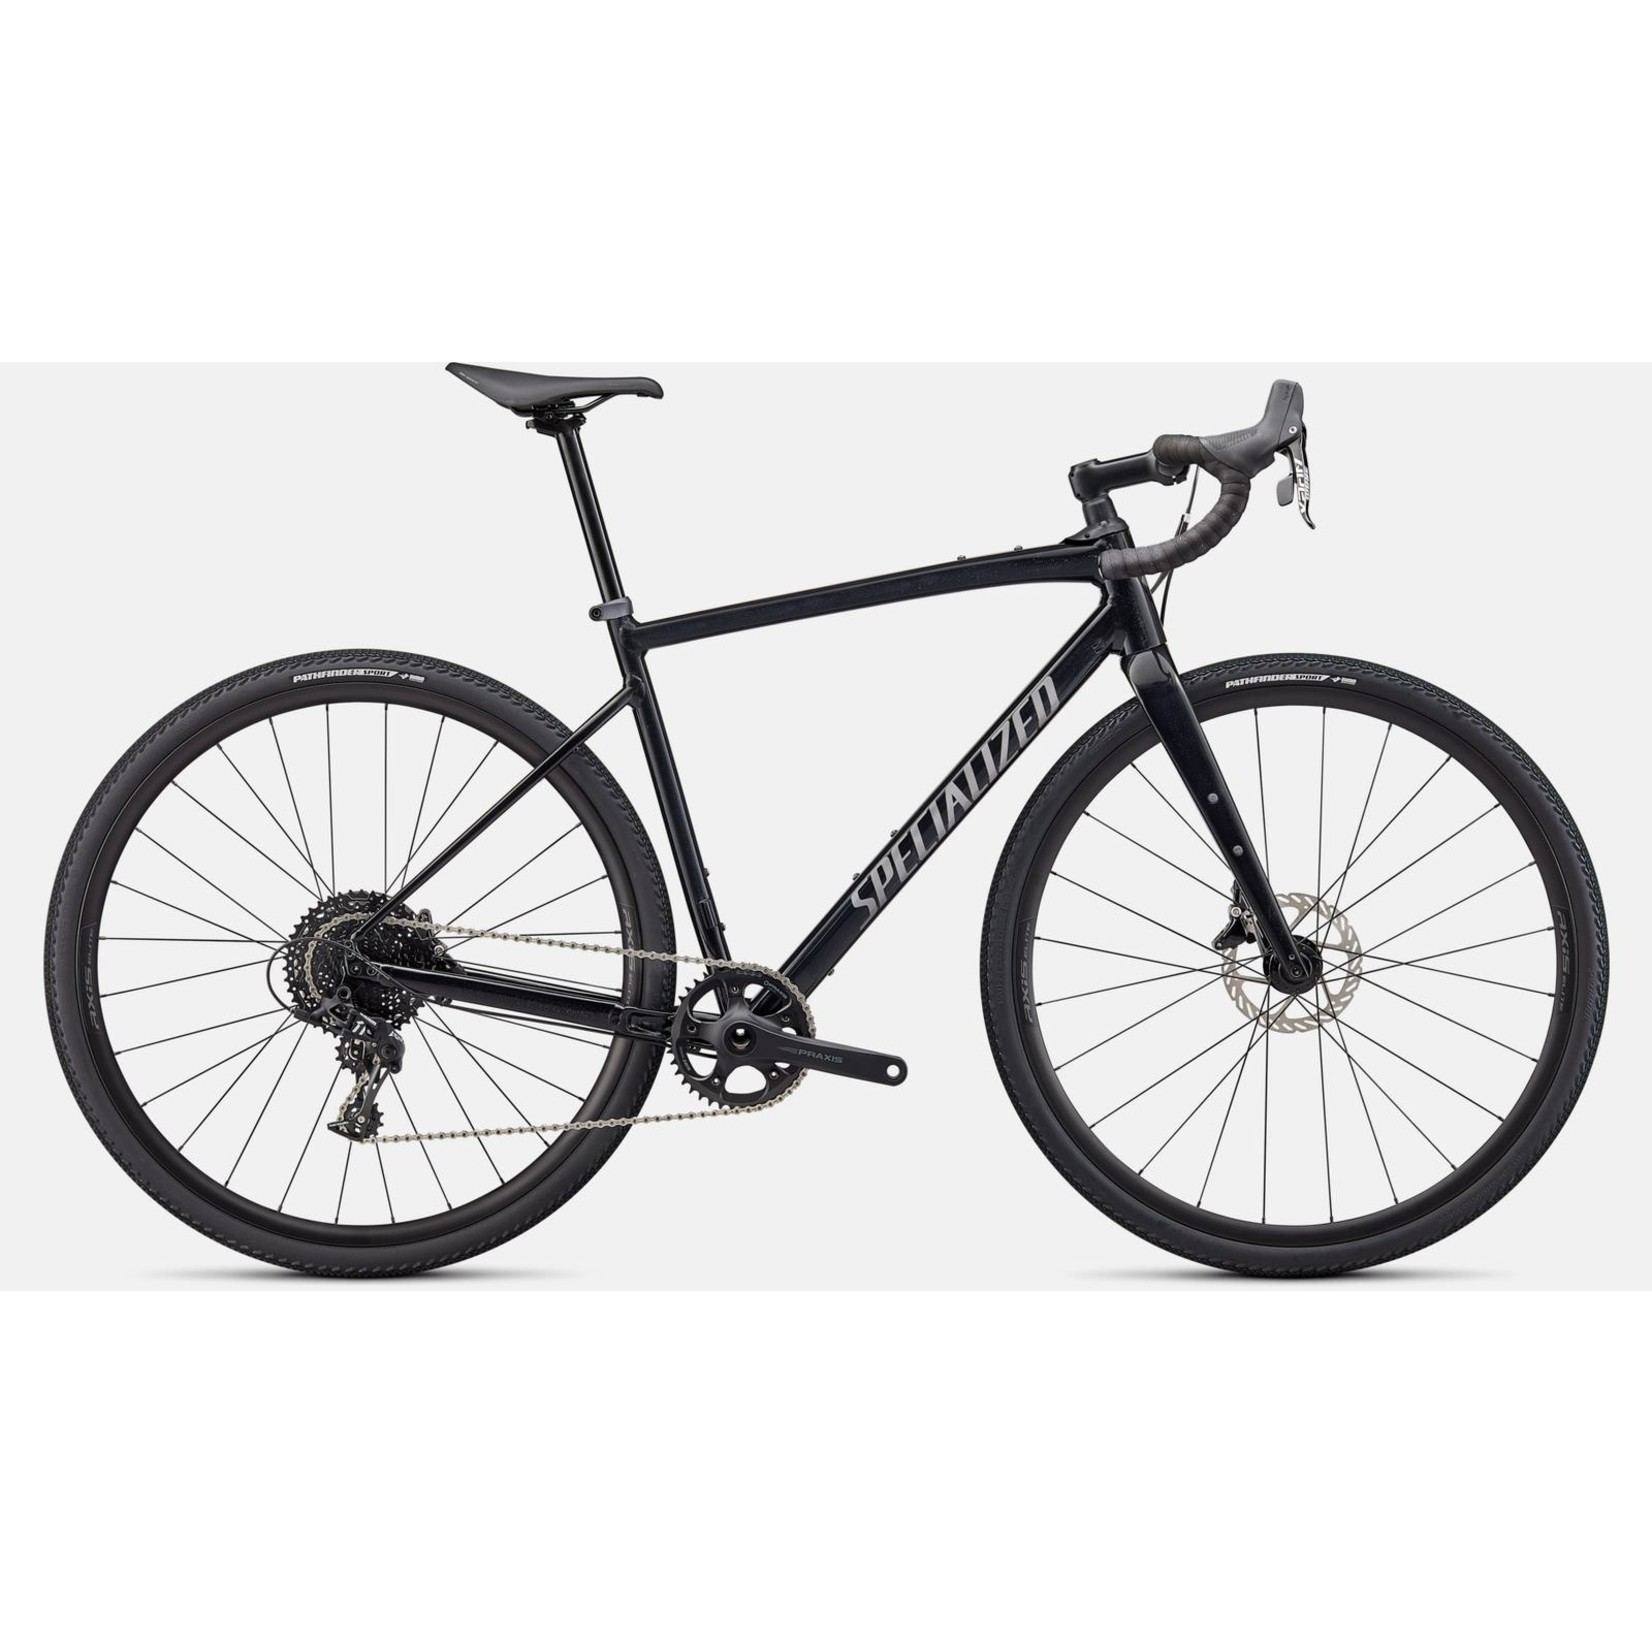 Specialized COMING SOON-SUMMER- Specialized DIVERGE E5 COMP - Tarmac Black/Smoke/Chrome 56